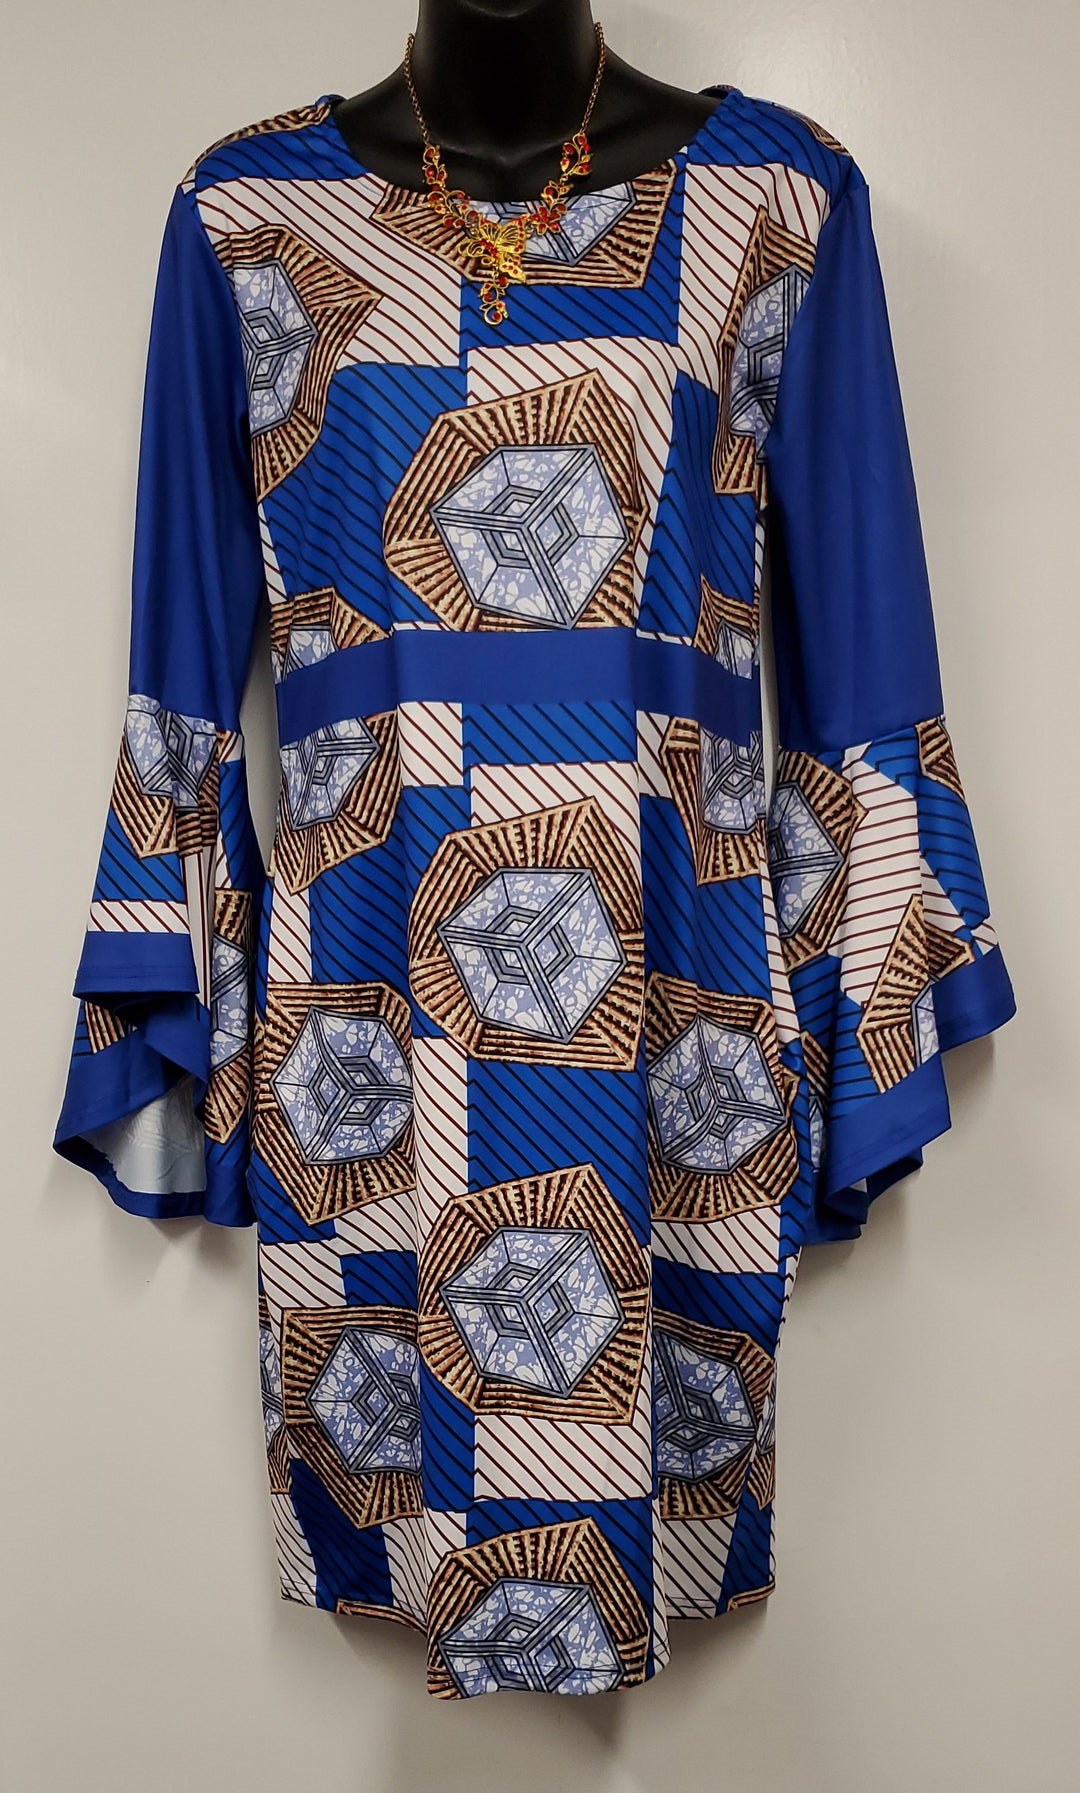 Ladies Royal Blue African Print Dress with Ruffle Sleeves